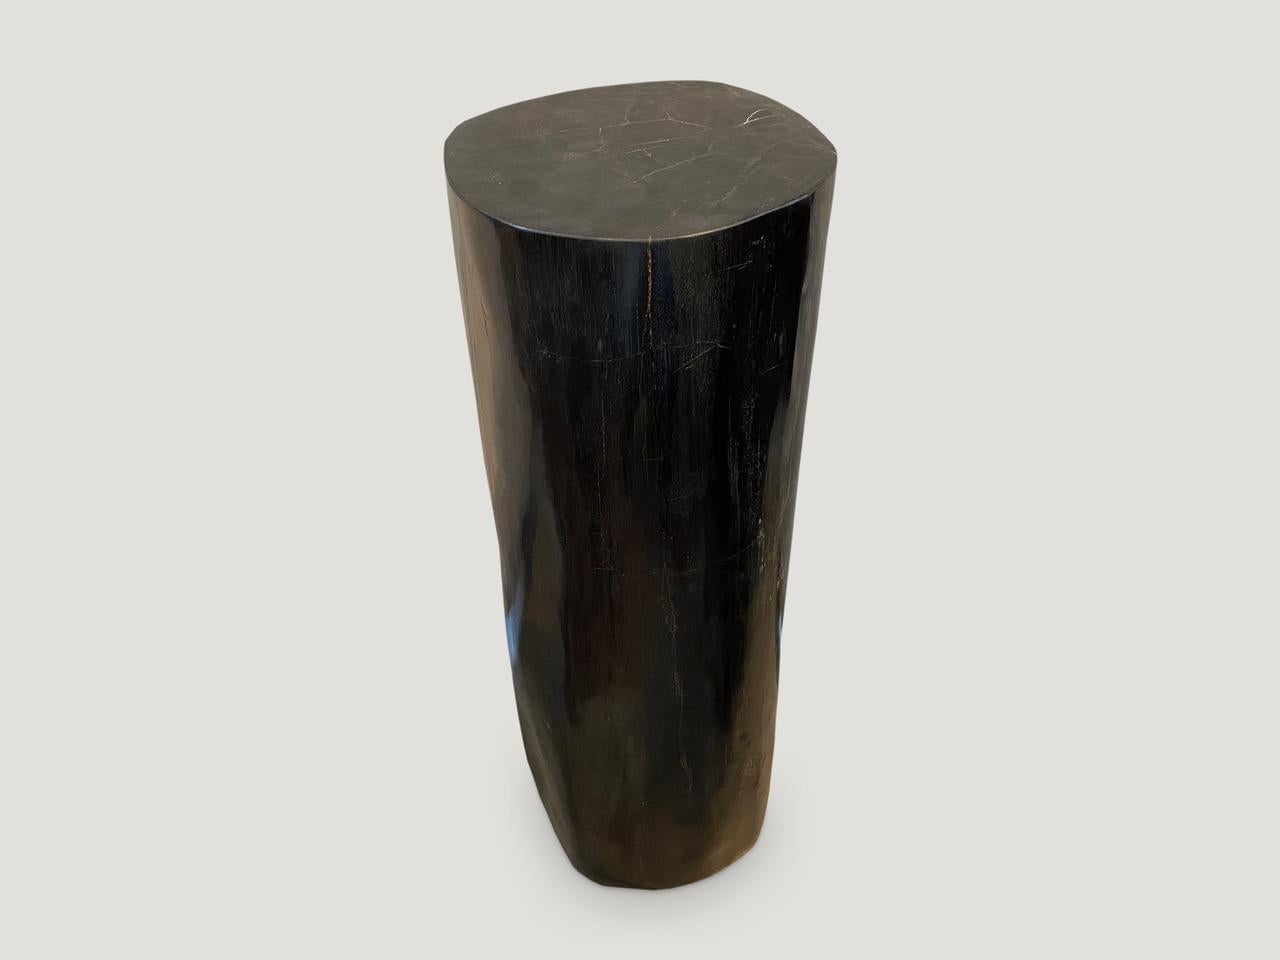 Impressive super smooth high quality petrified wood pedestal or side table. We have a pair cut from the same petrified wood log. The pair are shown together in the final images. The size and images reflect the single one shown.

As with a diamond,